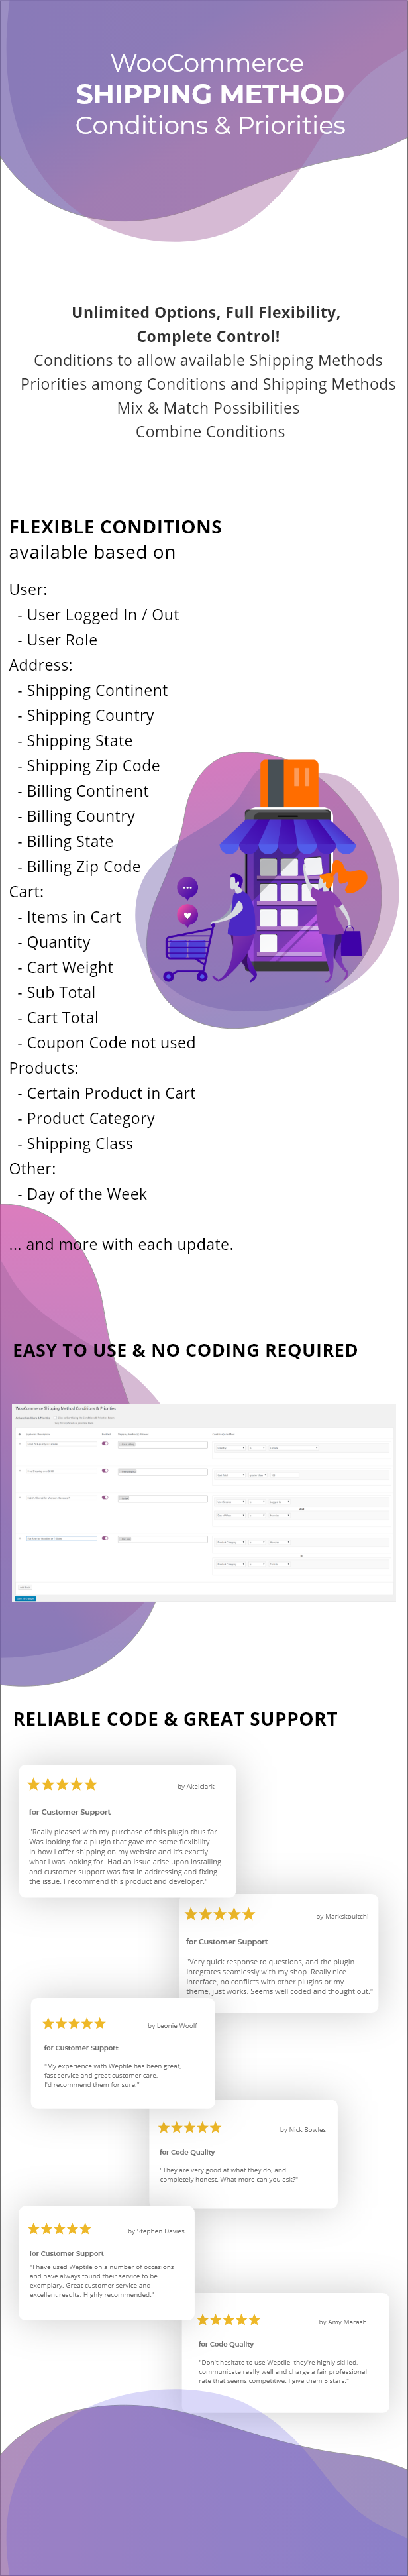 WooCommerce Shipping Method Conditions & Priorities - 1